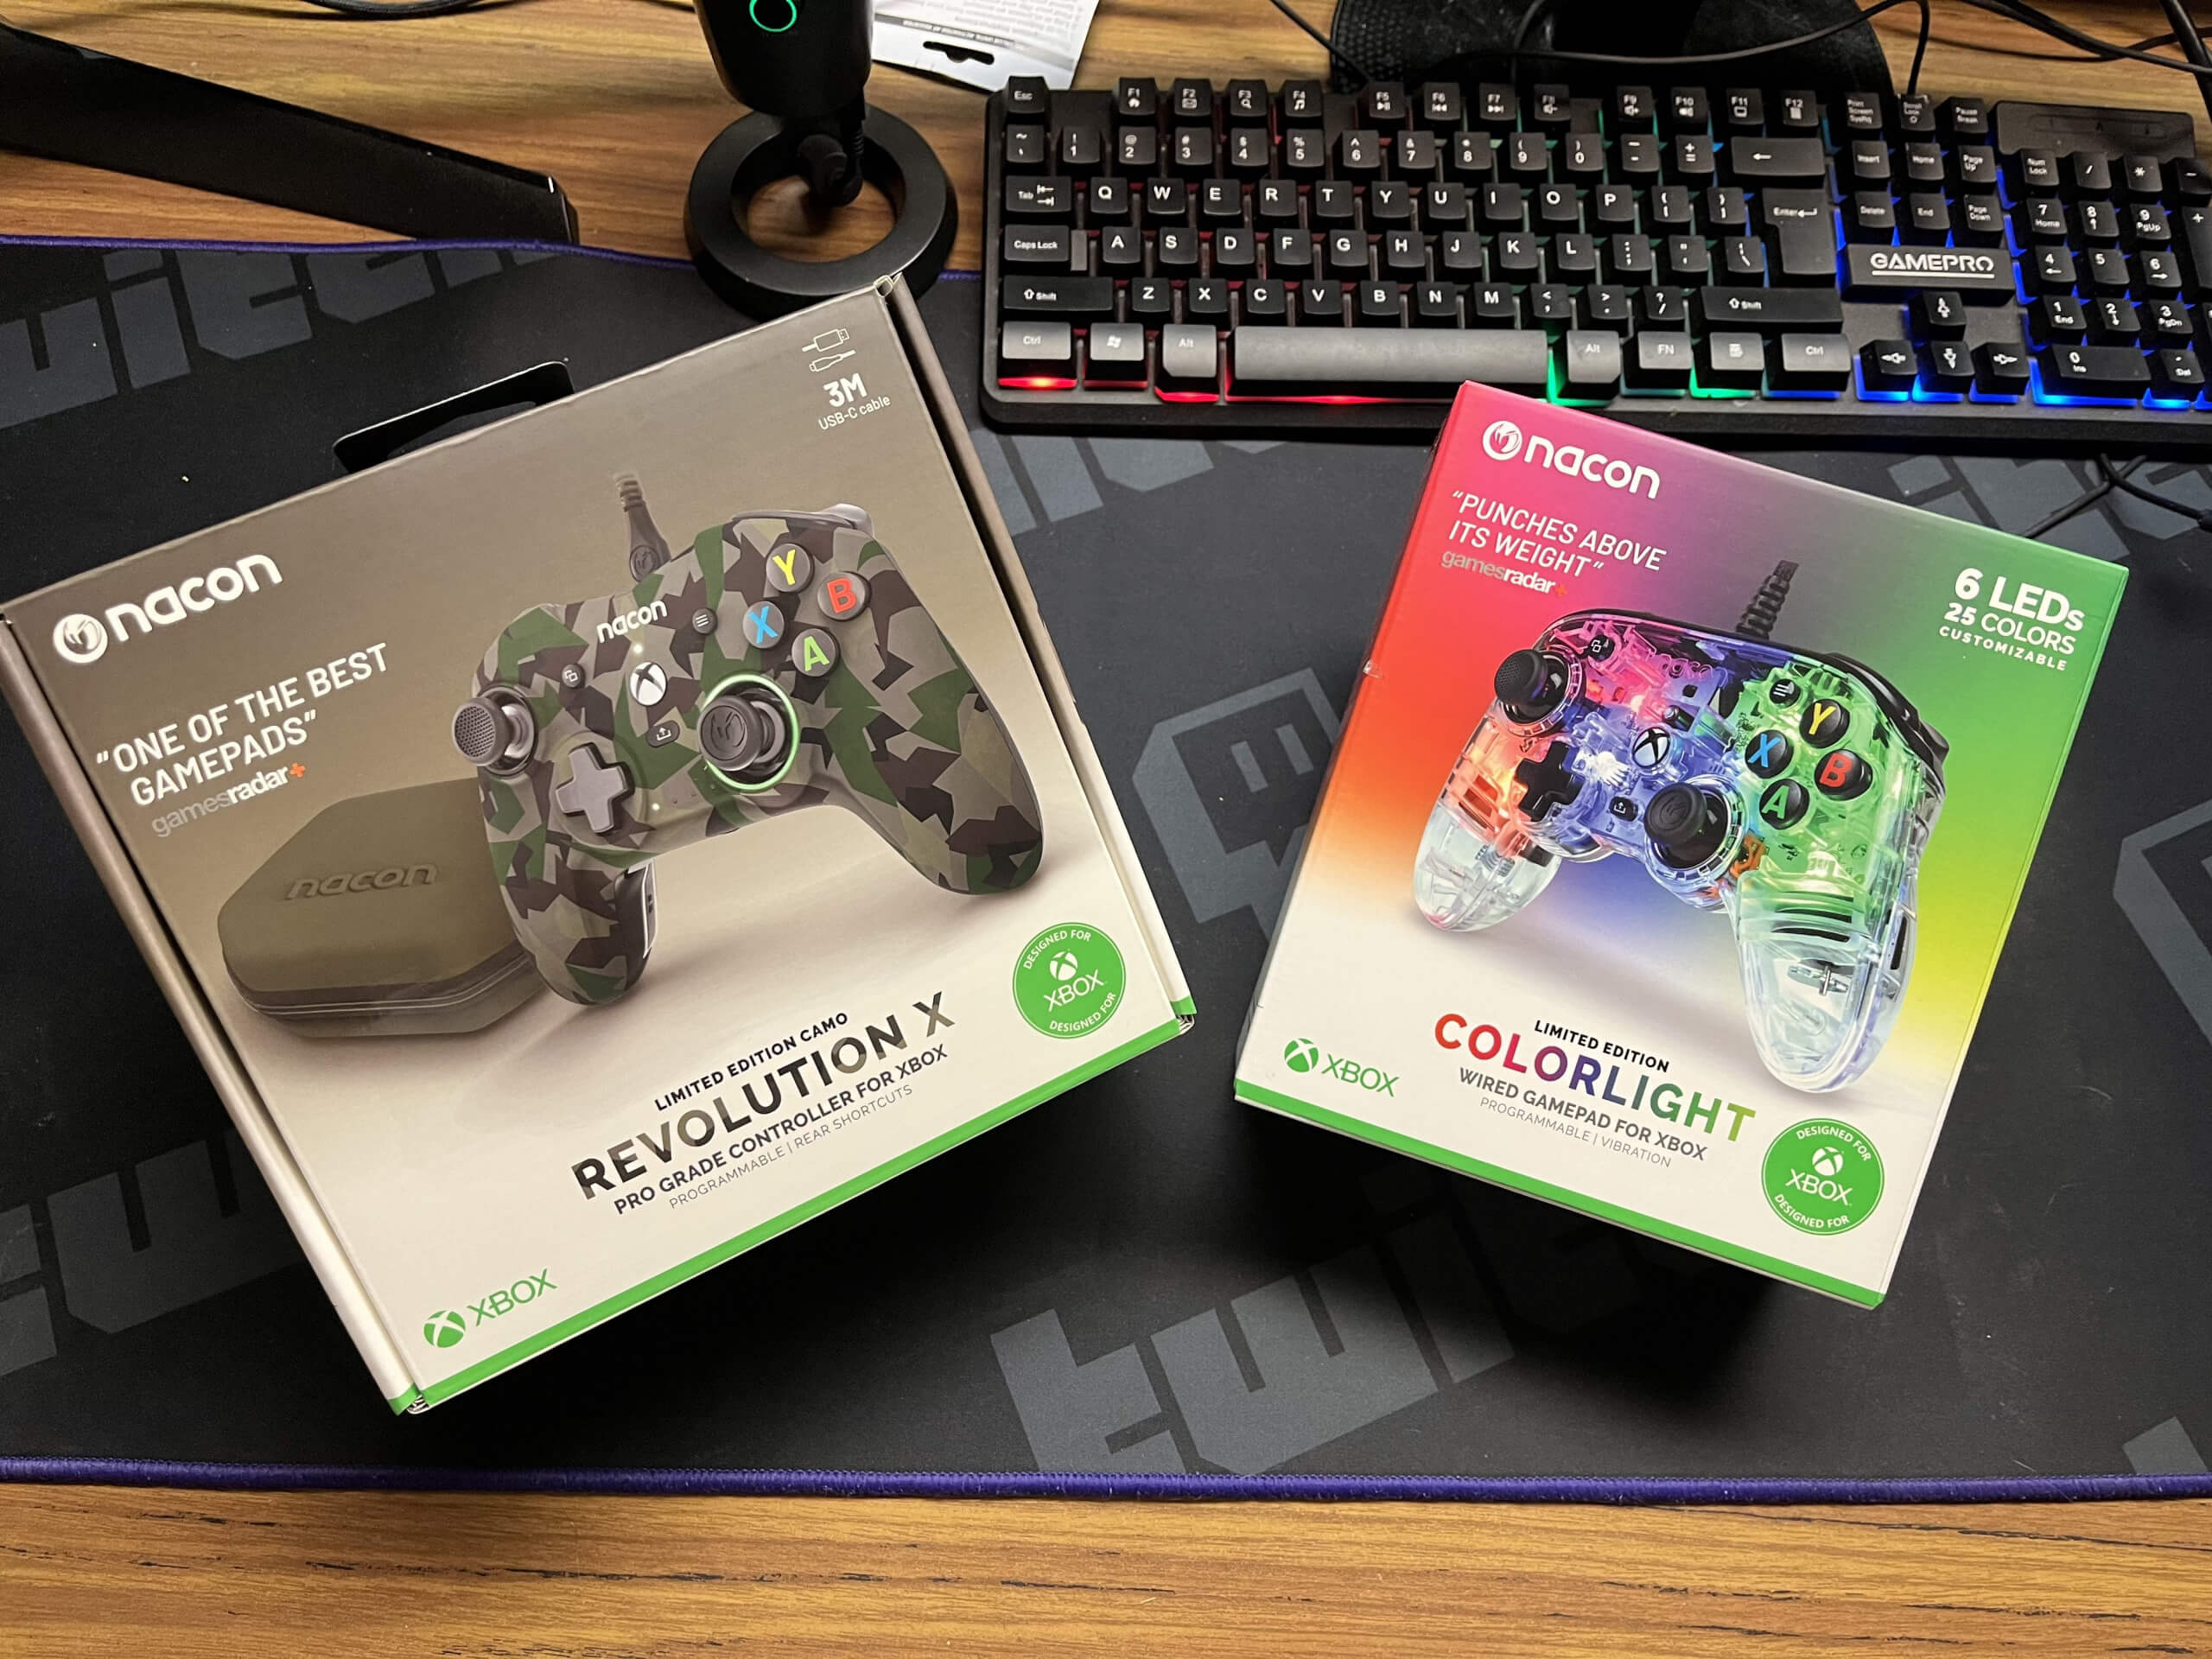 A box on the left with the Nacon Revolution X Pro in limited edition camo and the Nacon Pro Compact Colorlight on the right. The Colorlight box is very colorful whereas the Revolution X box is muted.